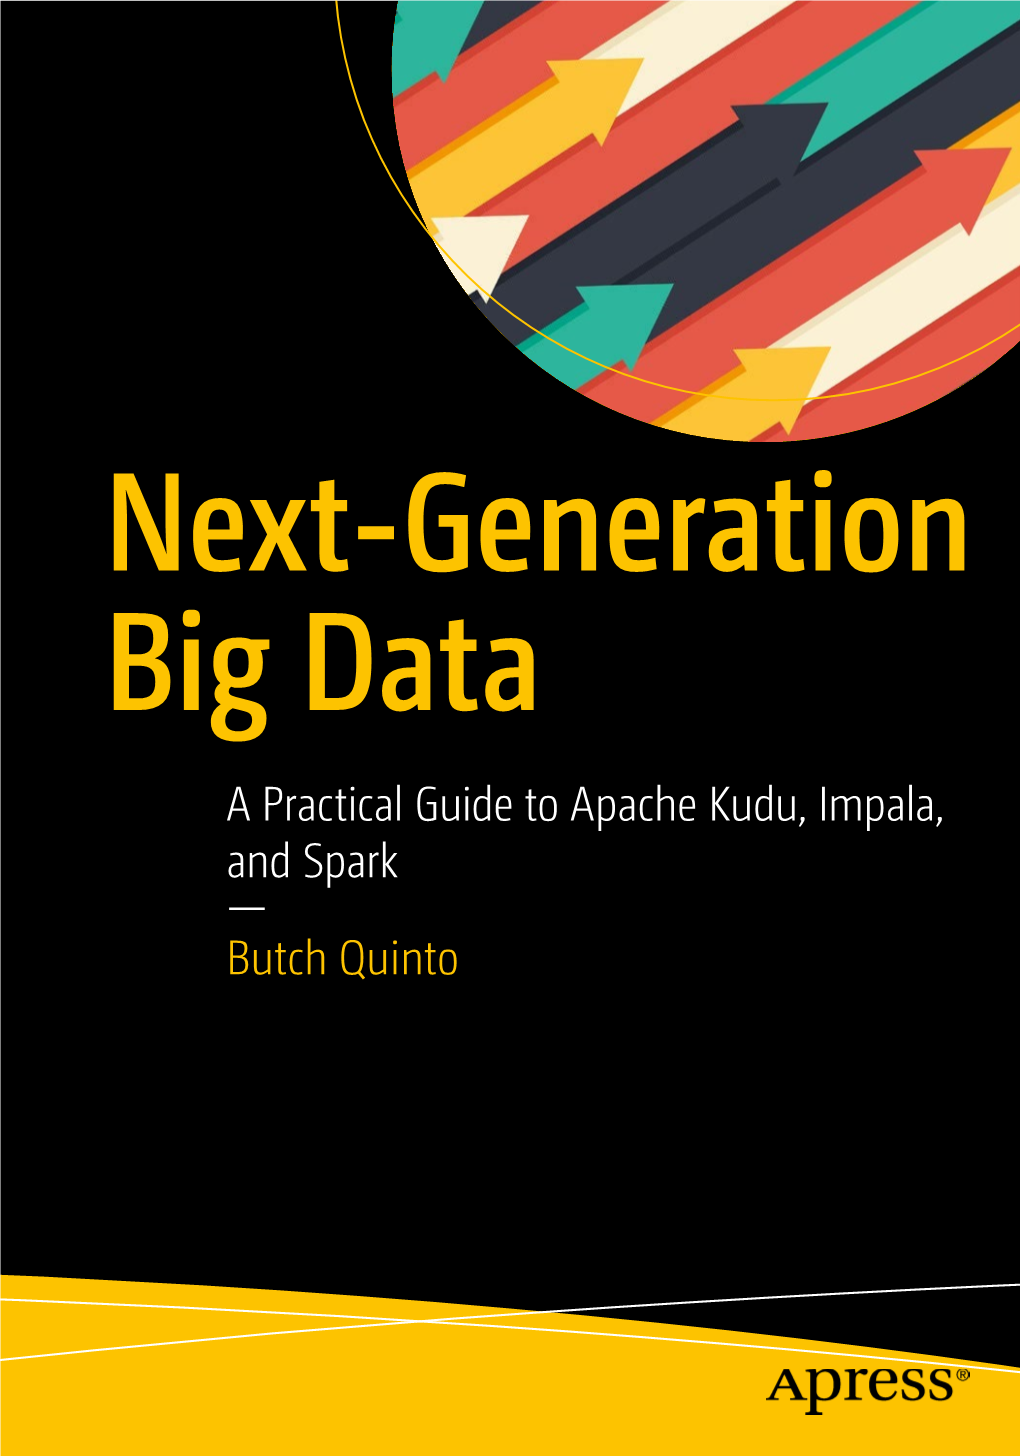 A Practical Guide to Apache Kudu, Impala, and Spark — Butch Quinto Next-Generation Big Data a Practical Guide to Apache Kudu, Impala, and Spark